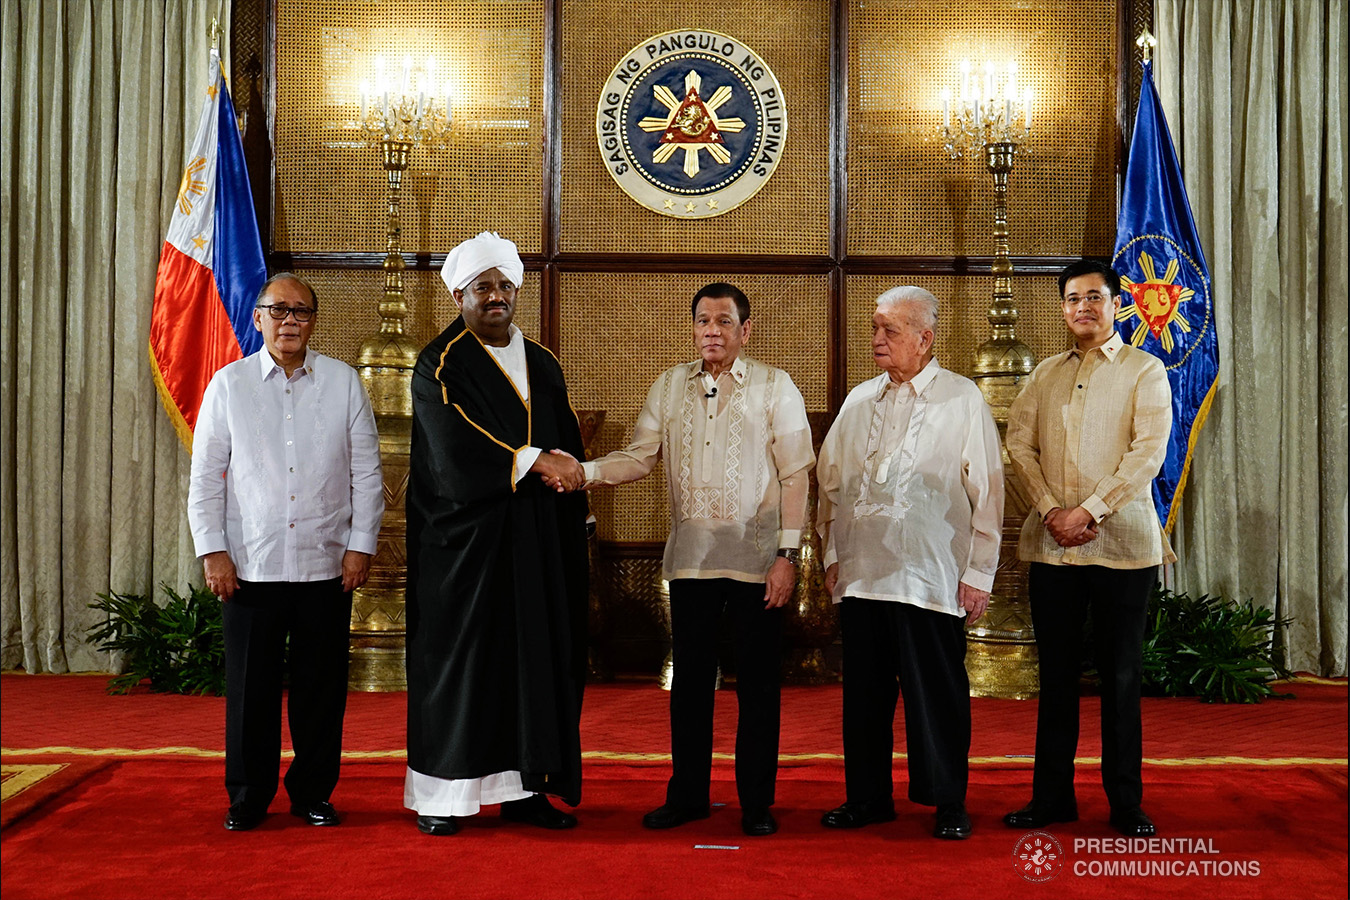 President Rodrigo Roa Duterte poses for posterity with Non-resident Ambassador Designate of Sudan Hamza Omer Hassan Ahmed after the latter presented his credentials to the President during a ceremony at the Malacañan Palace on January 21, 2019. Joining the President are Foreign Affairs Undersecretary Ernesto Abella and Presidential Adviser on Foreign Affairs and Chief of Presidential Protocol Robert Borje. KING RODRIGUEZ/PRESIDENTIAL PHOTO